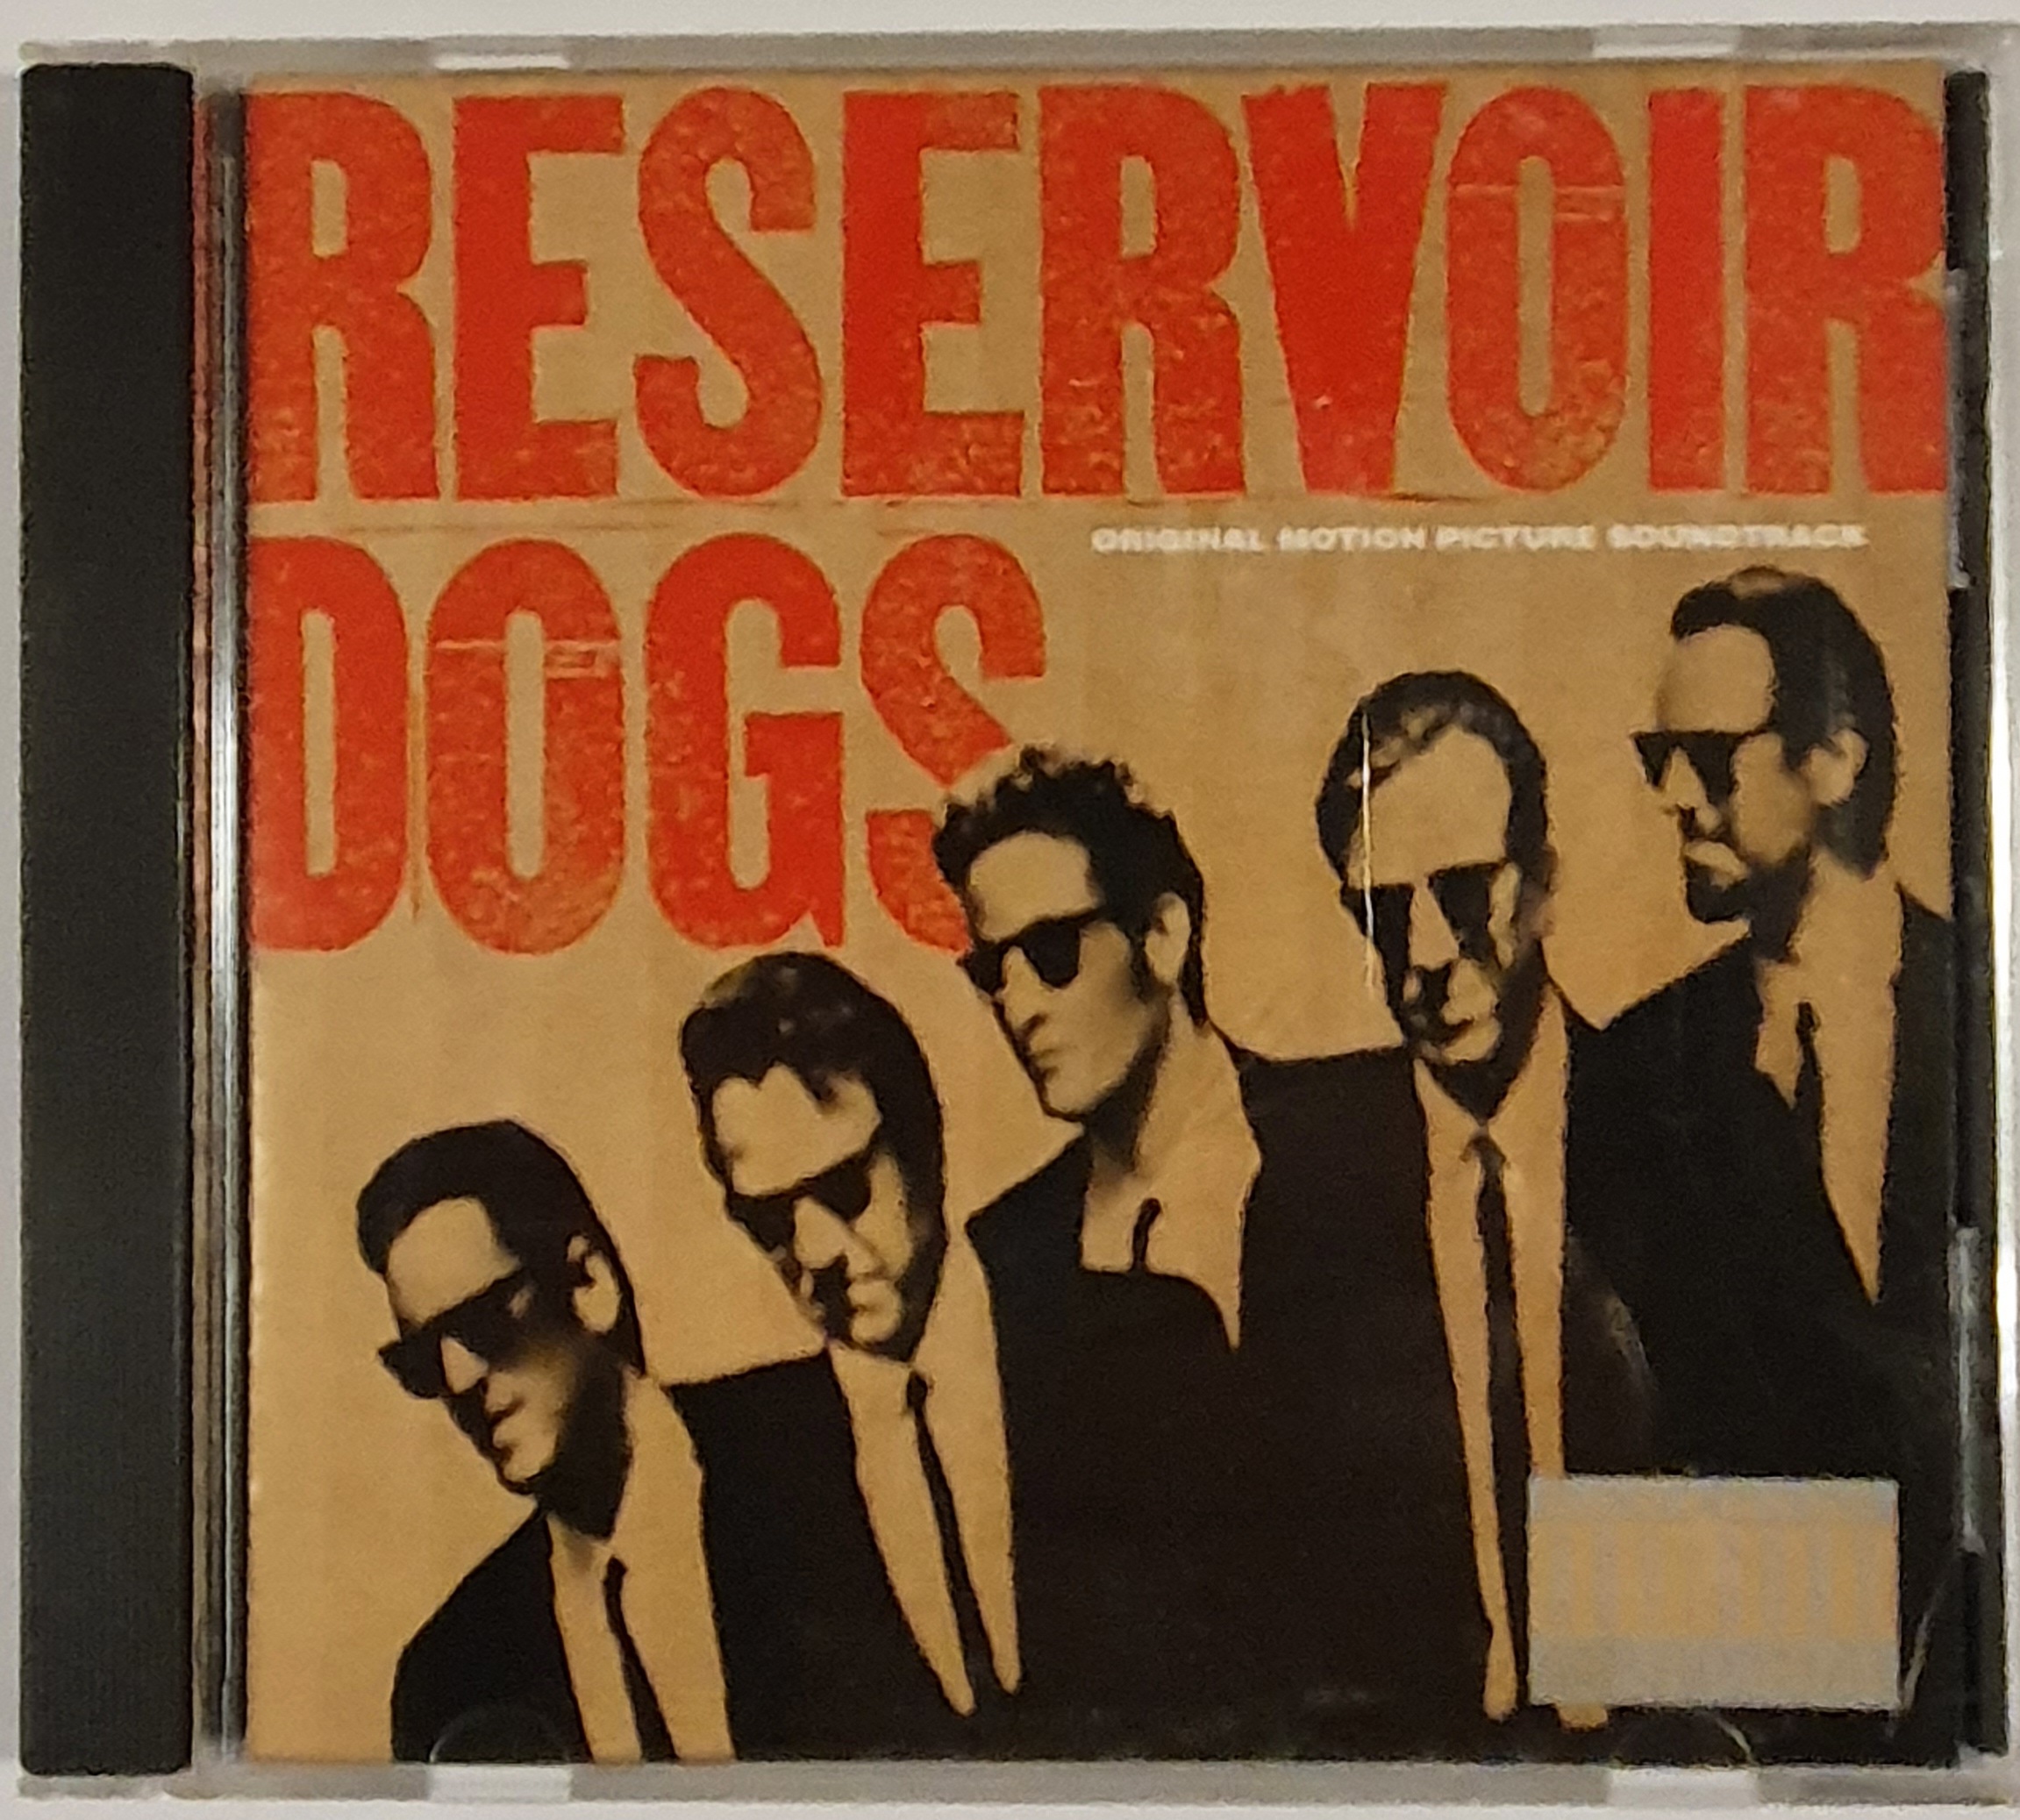 CD, Soundtrack, Reservoir Dogs (Music From The Original Motion Picture Soundtrack)